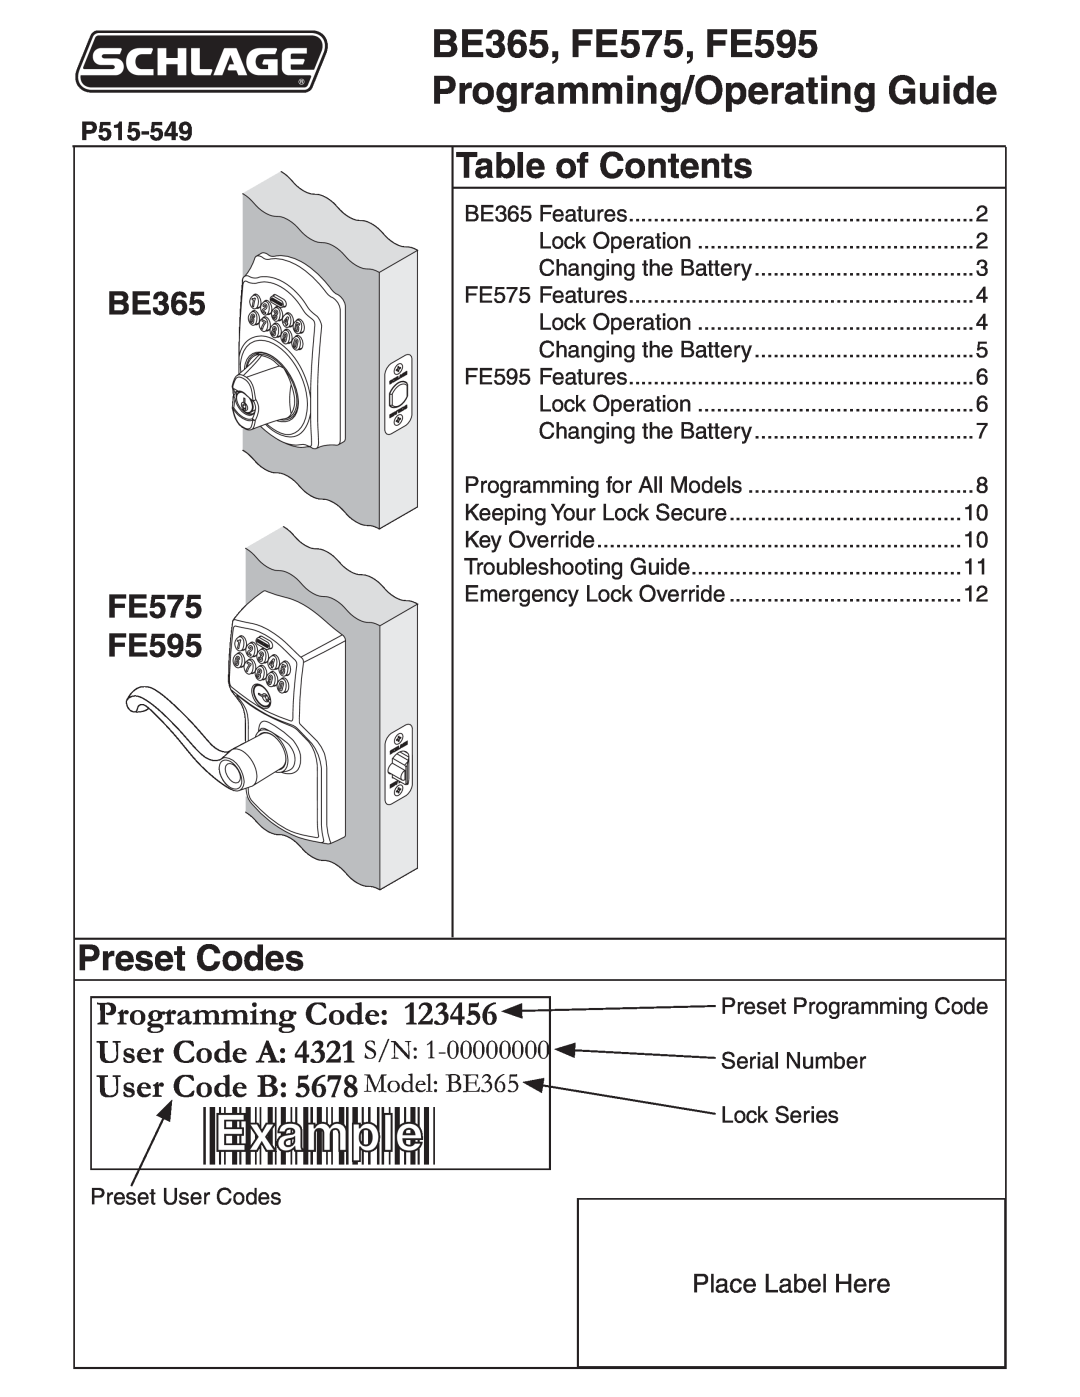 Schlage manual Table of Contents, Preset Codes, P515-549, BE365, FE575, FE595, Programming/Operating Guide 